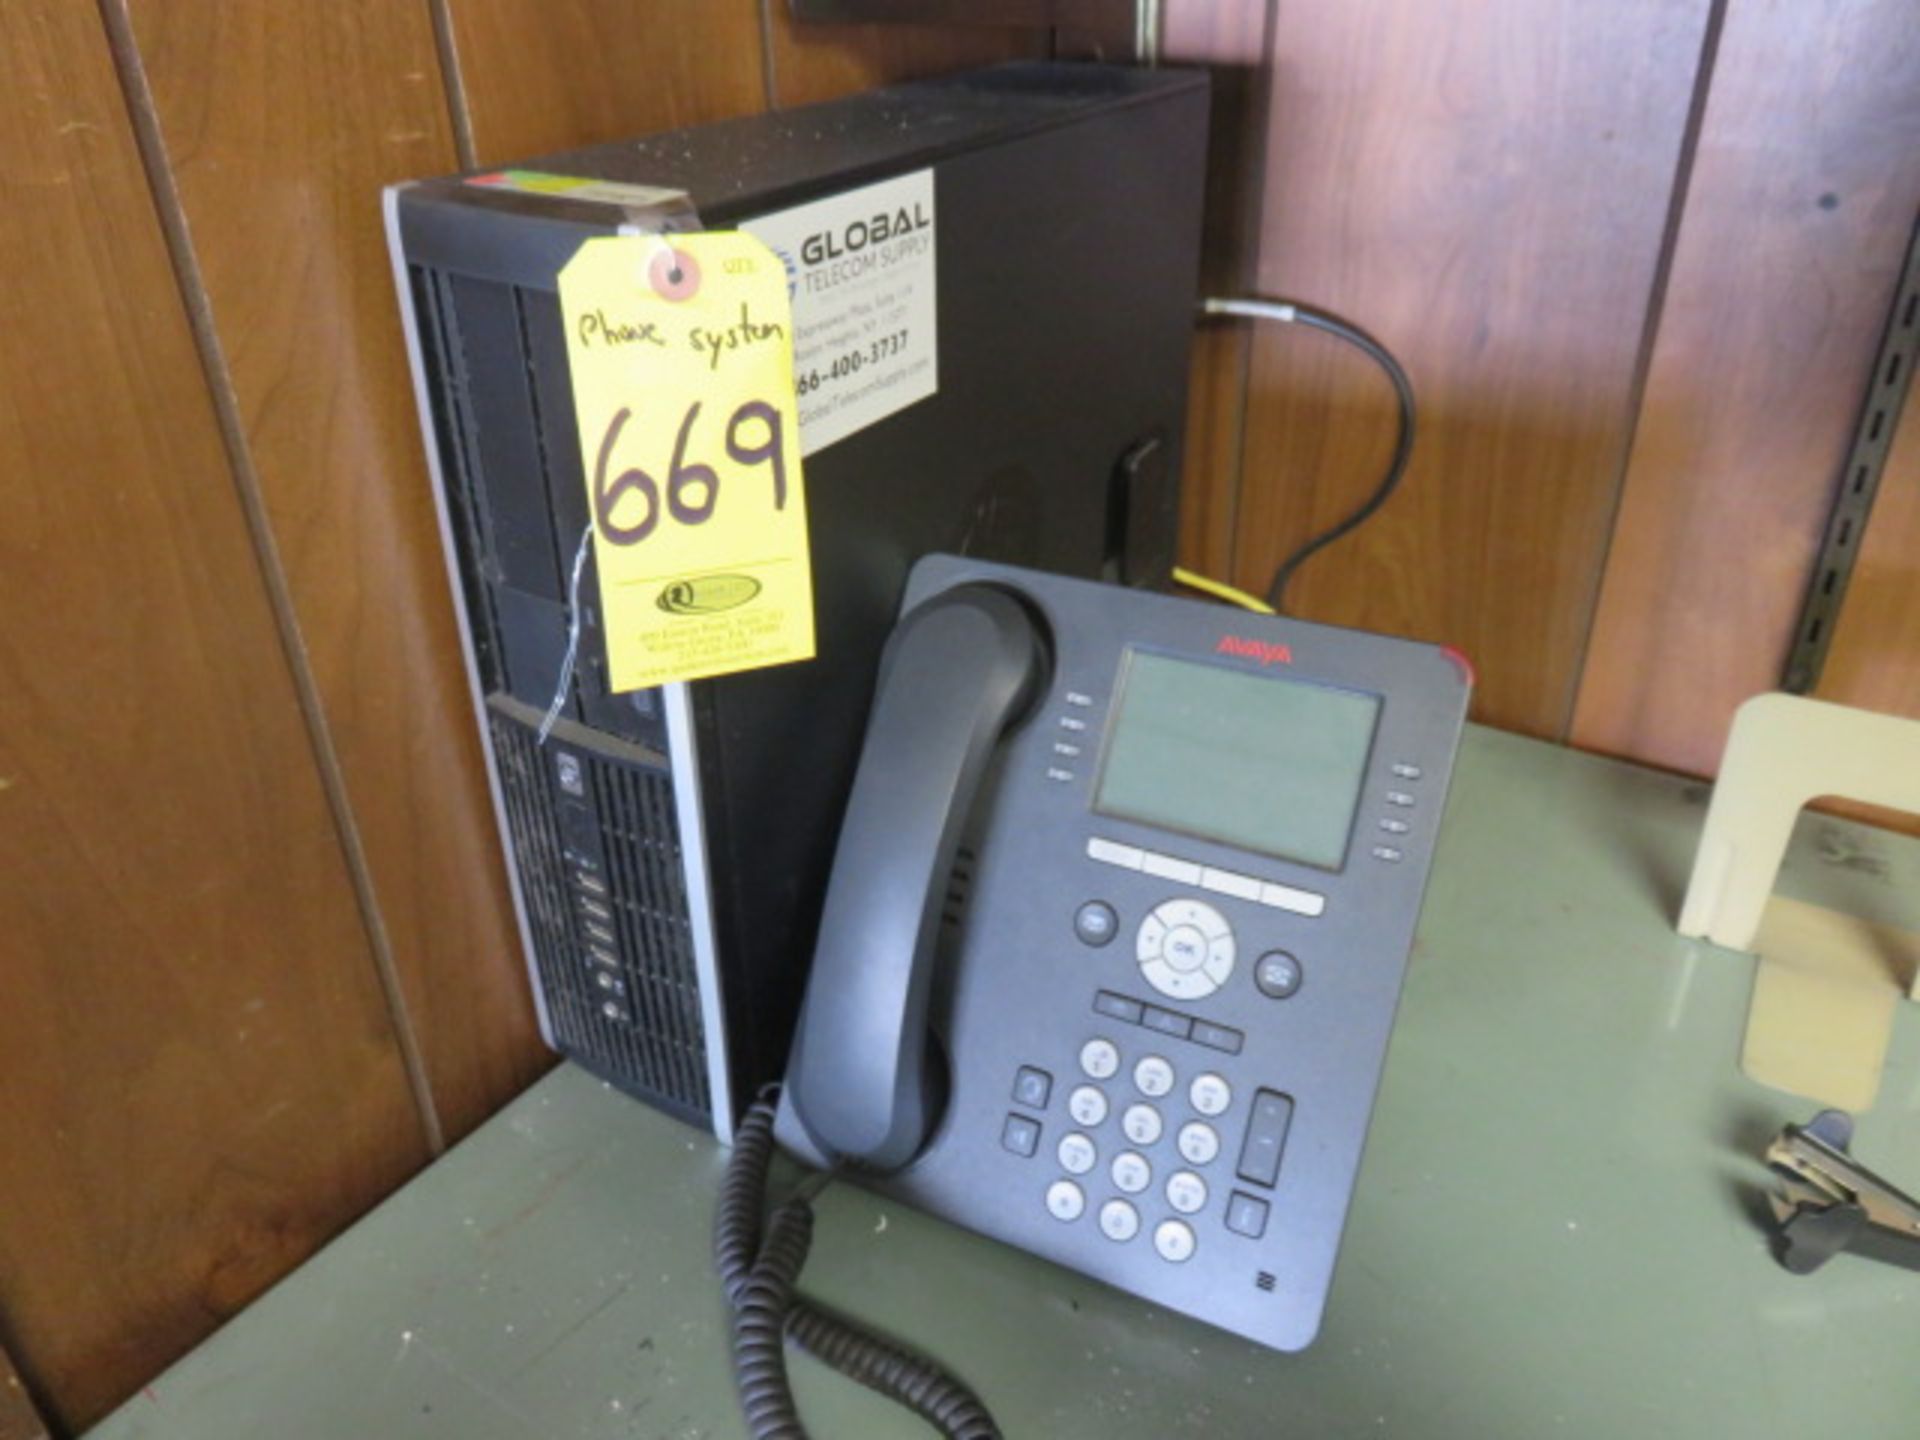 AVAYA PHONE SYSTEM W/ IP OFFICE 500 V2 and (16) 9508 TELEPHONES (MUST BE REMOVED APRIL 9TH)